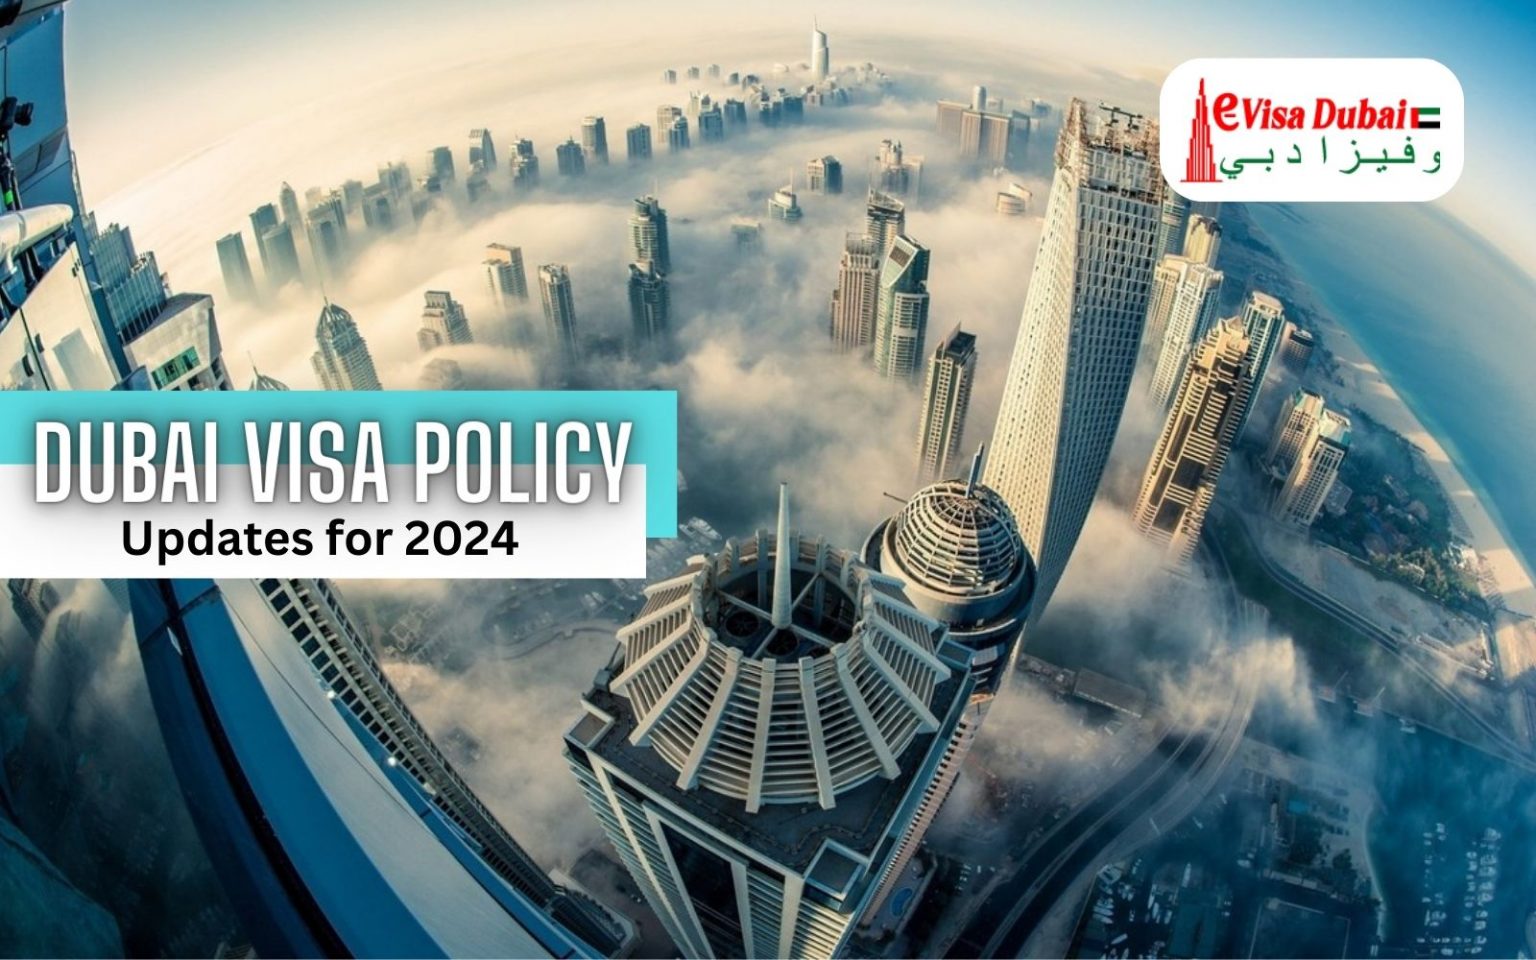 Dubai Visa Policy Updates for 2024: What Travelers Need to Know